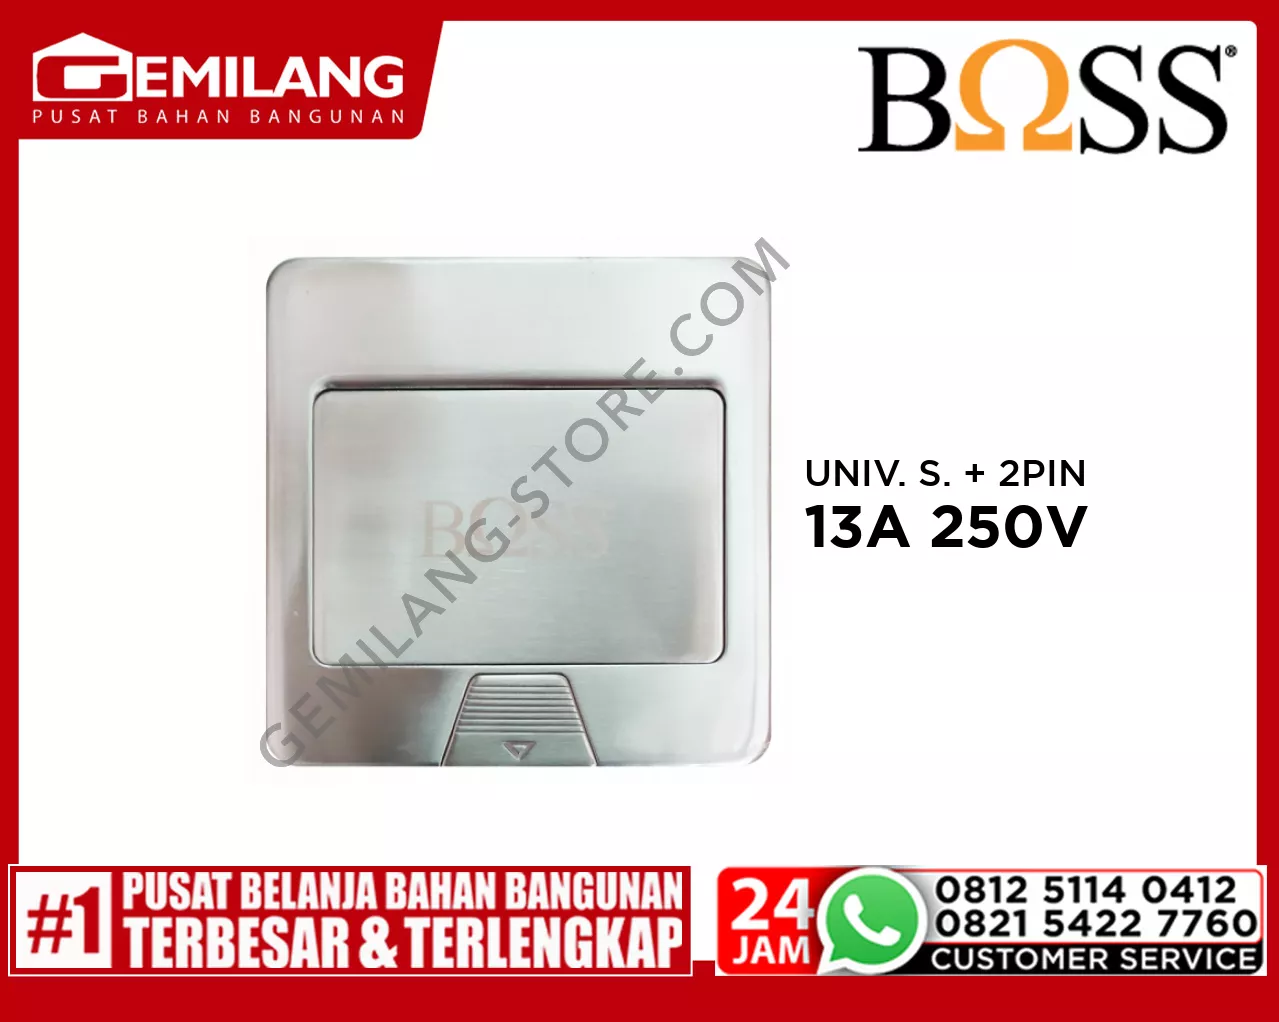 BOSS UNIVERSAL SOCKET + 2 PIN SOCKET OUTLET 13A 250V BF0426/10IS-US